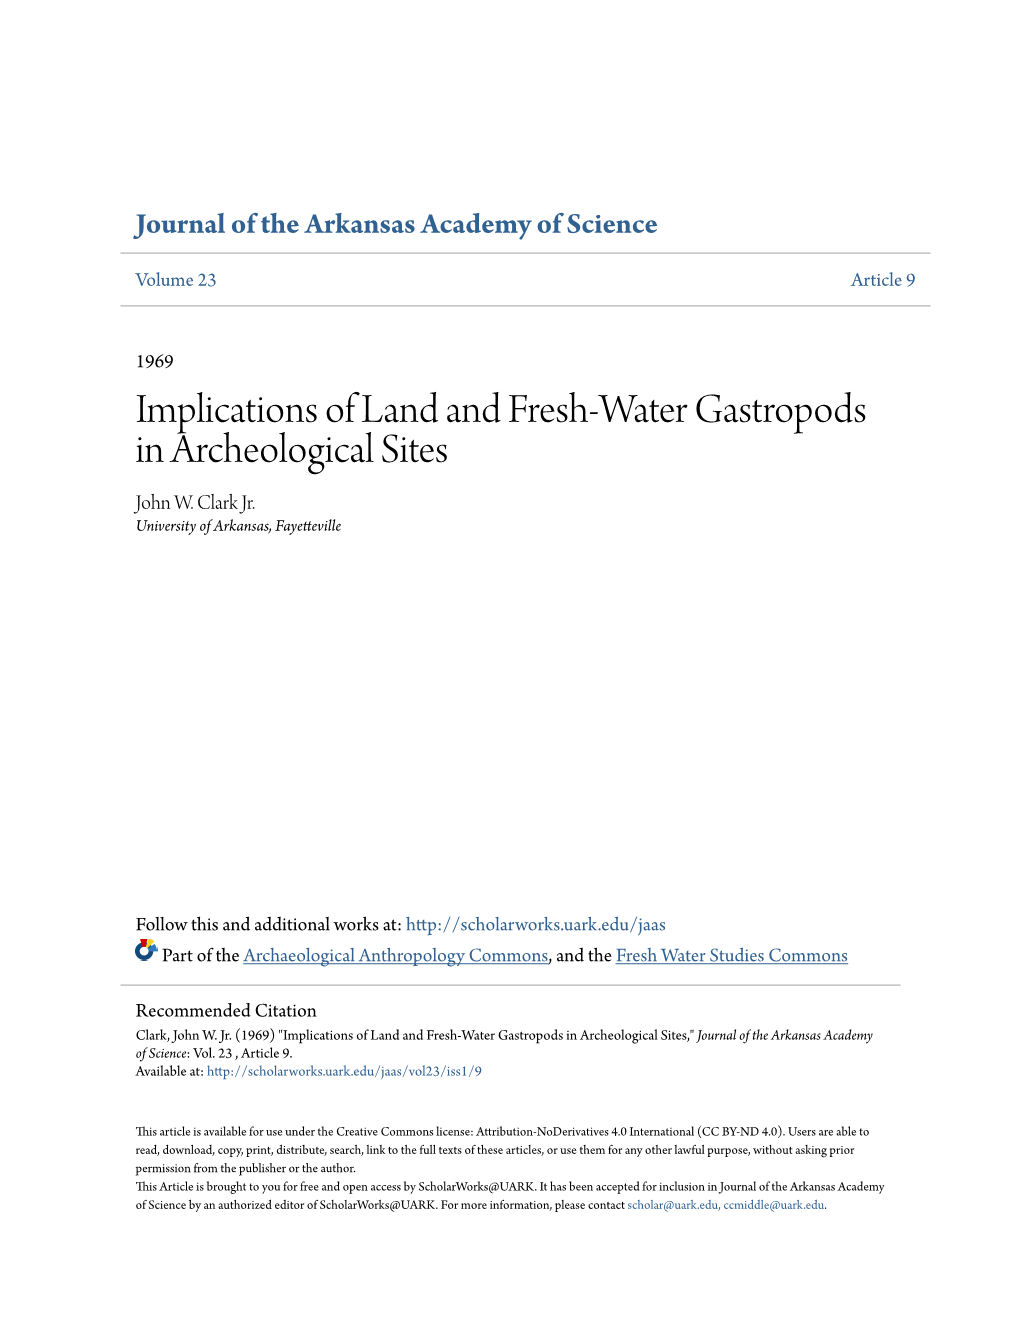 Implications of Land and Fresh-Water Gastropods in Archeological Sites John W